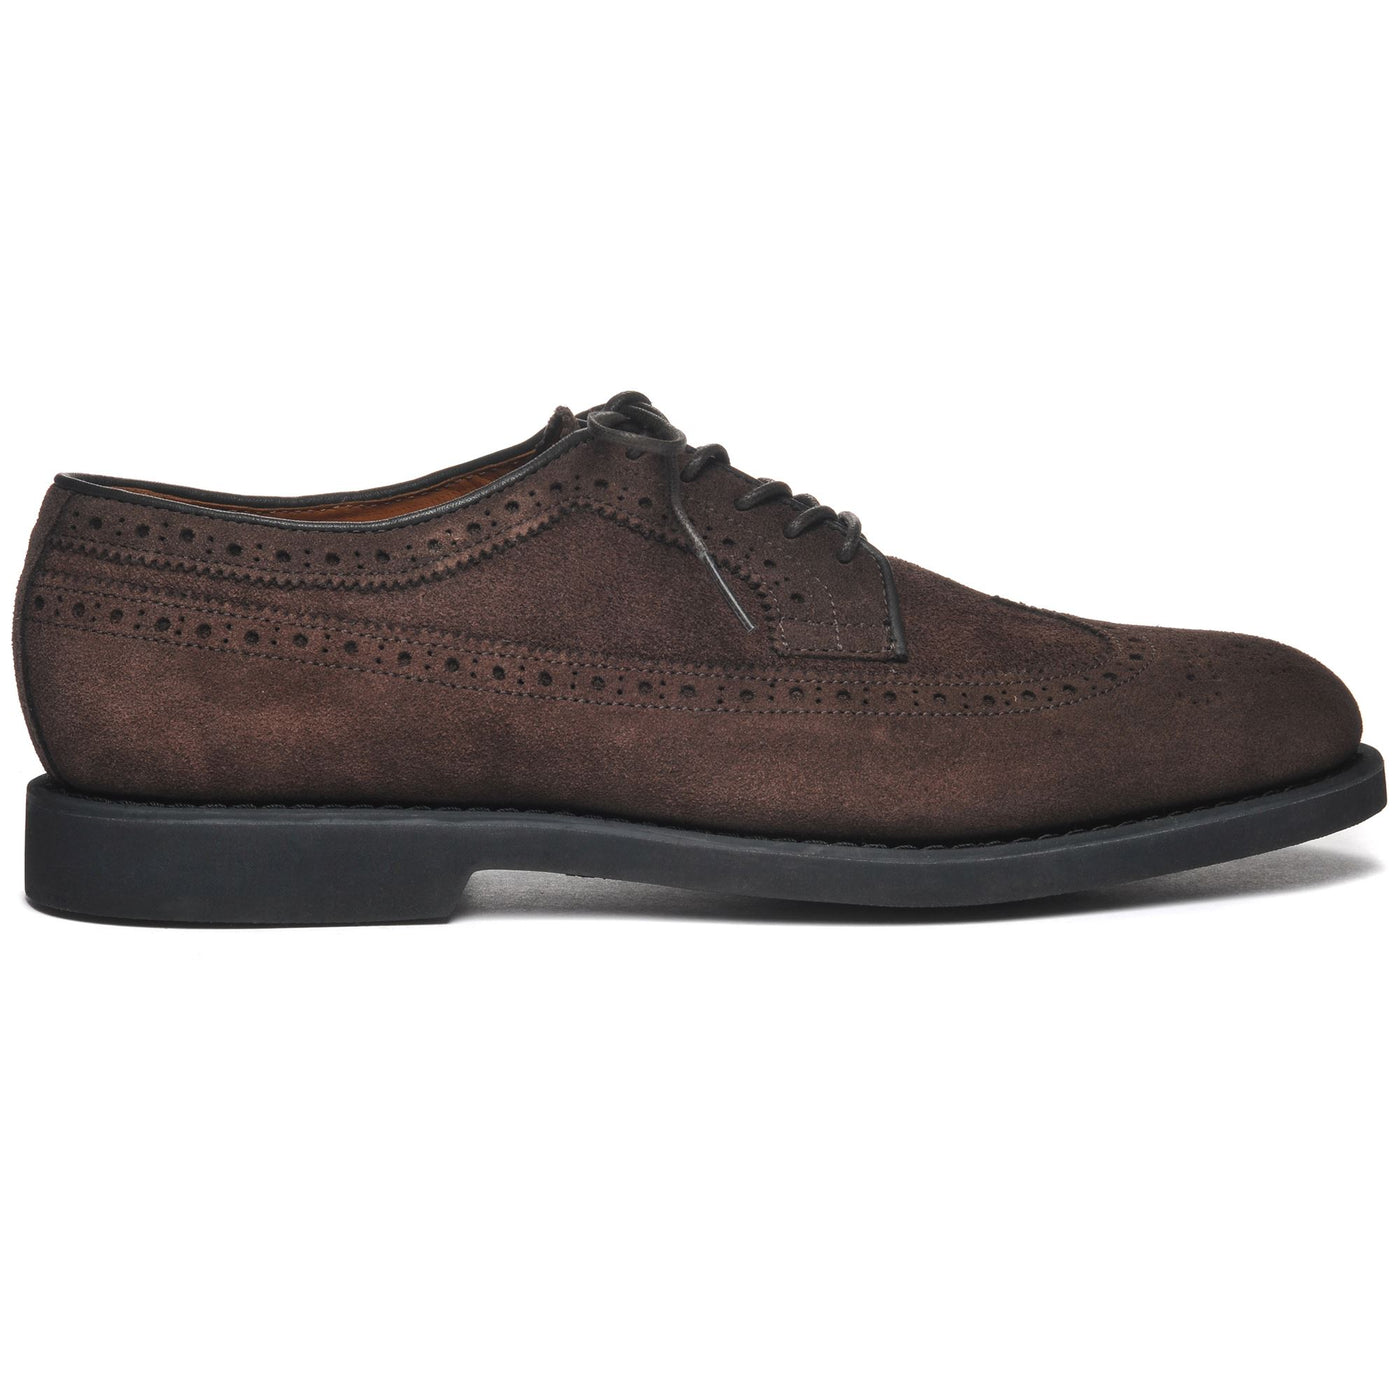 Laced Shoes Man CANTON SUEDE Low Cut DK BROWN Photo (jpg Rgb)			